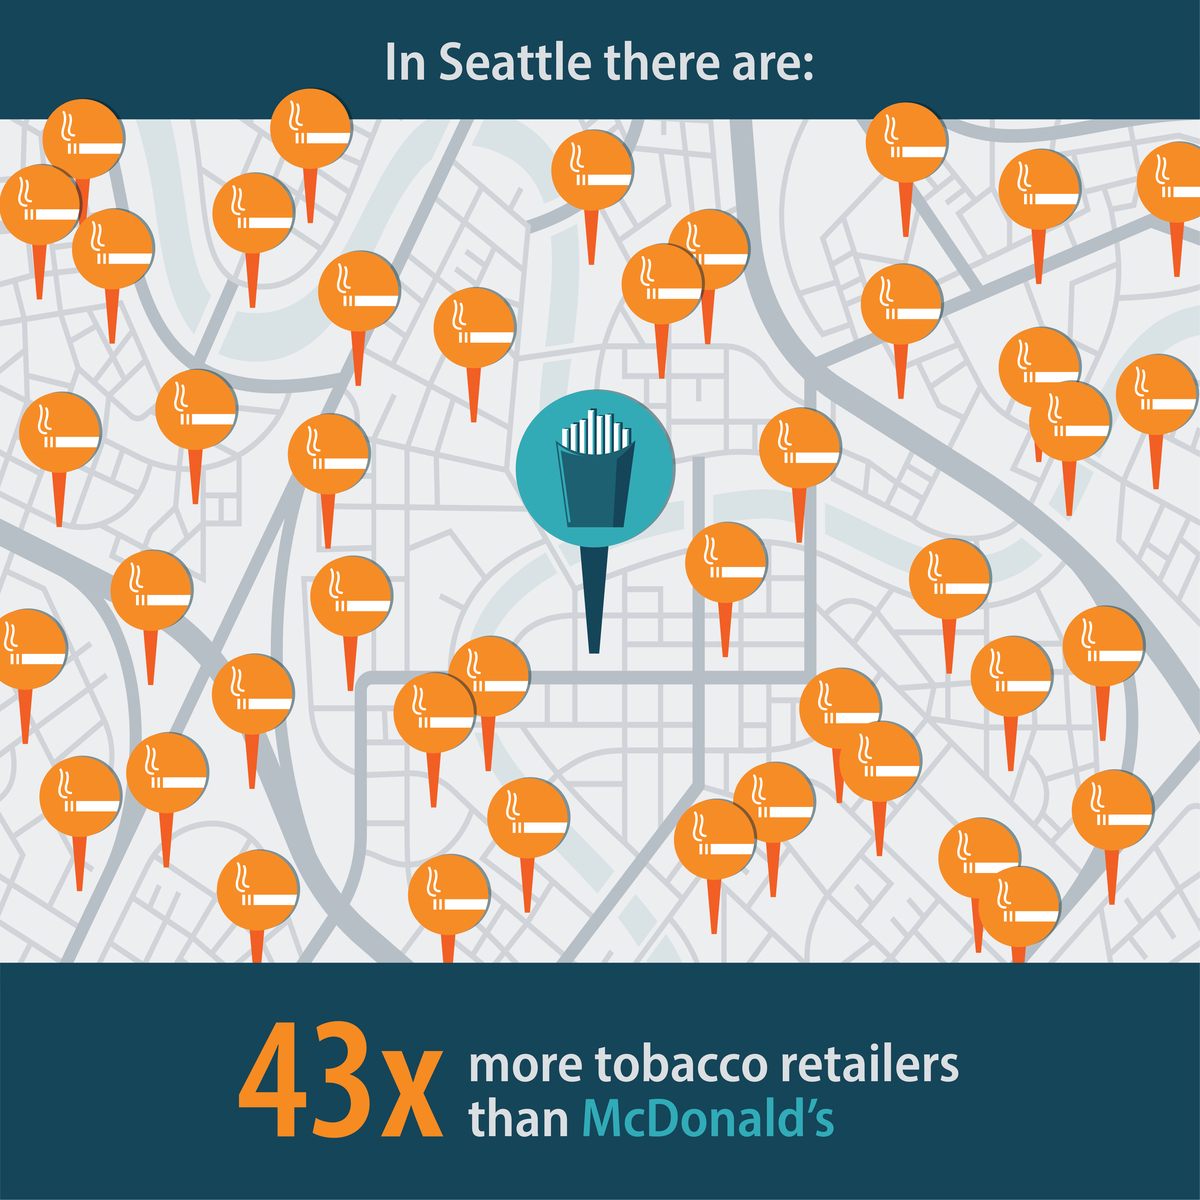 In Seattle there are: 43 times more tobacco retailers than McDonald's